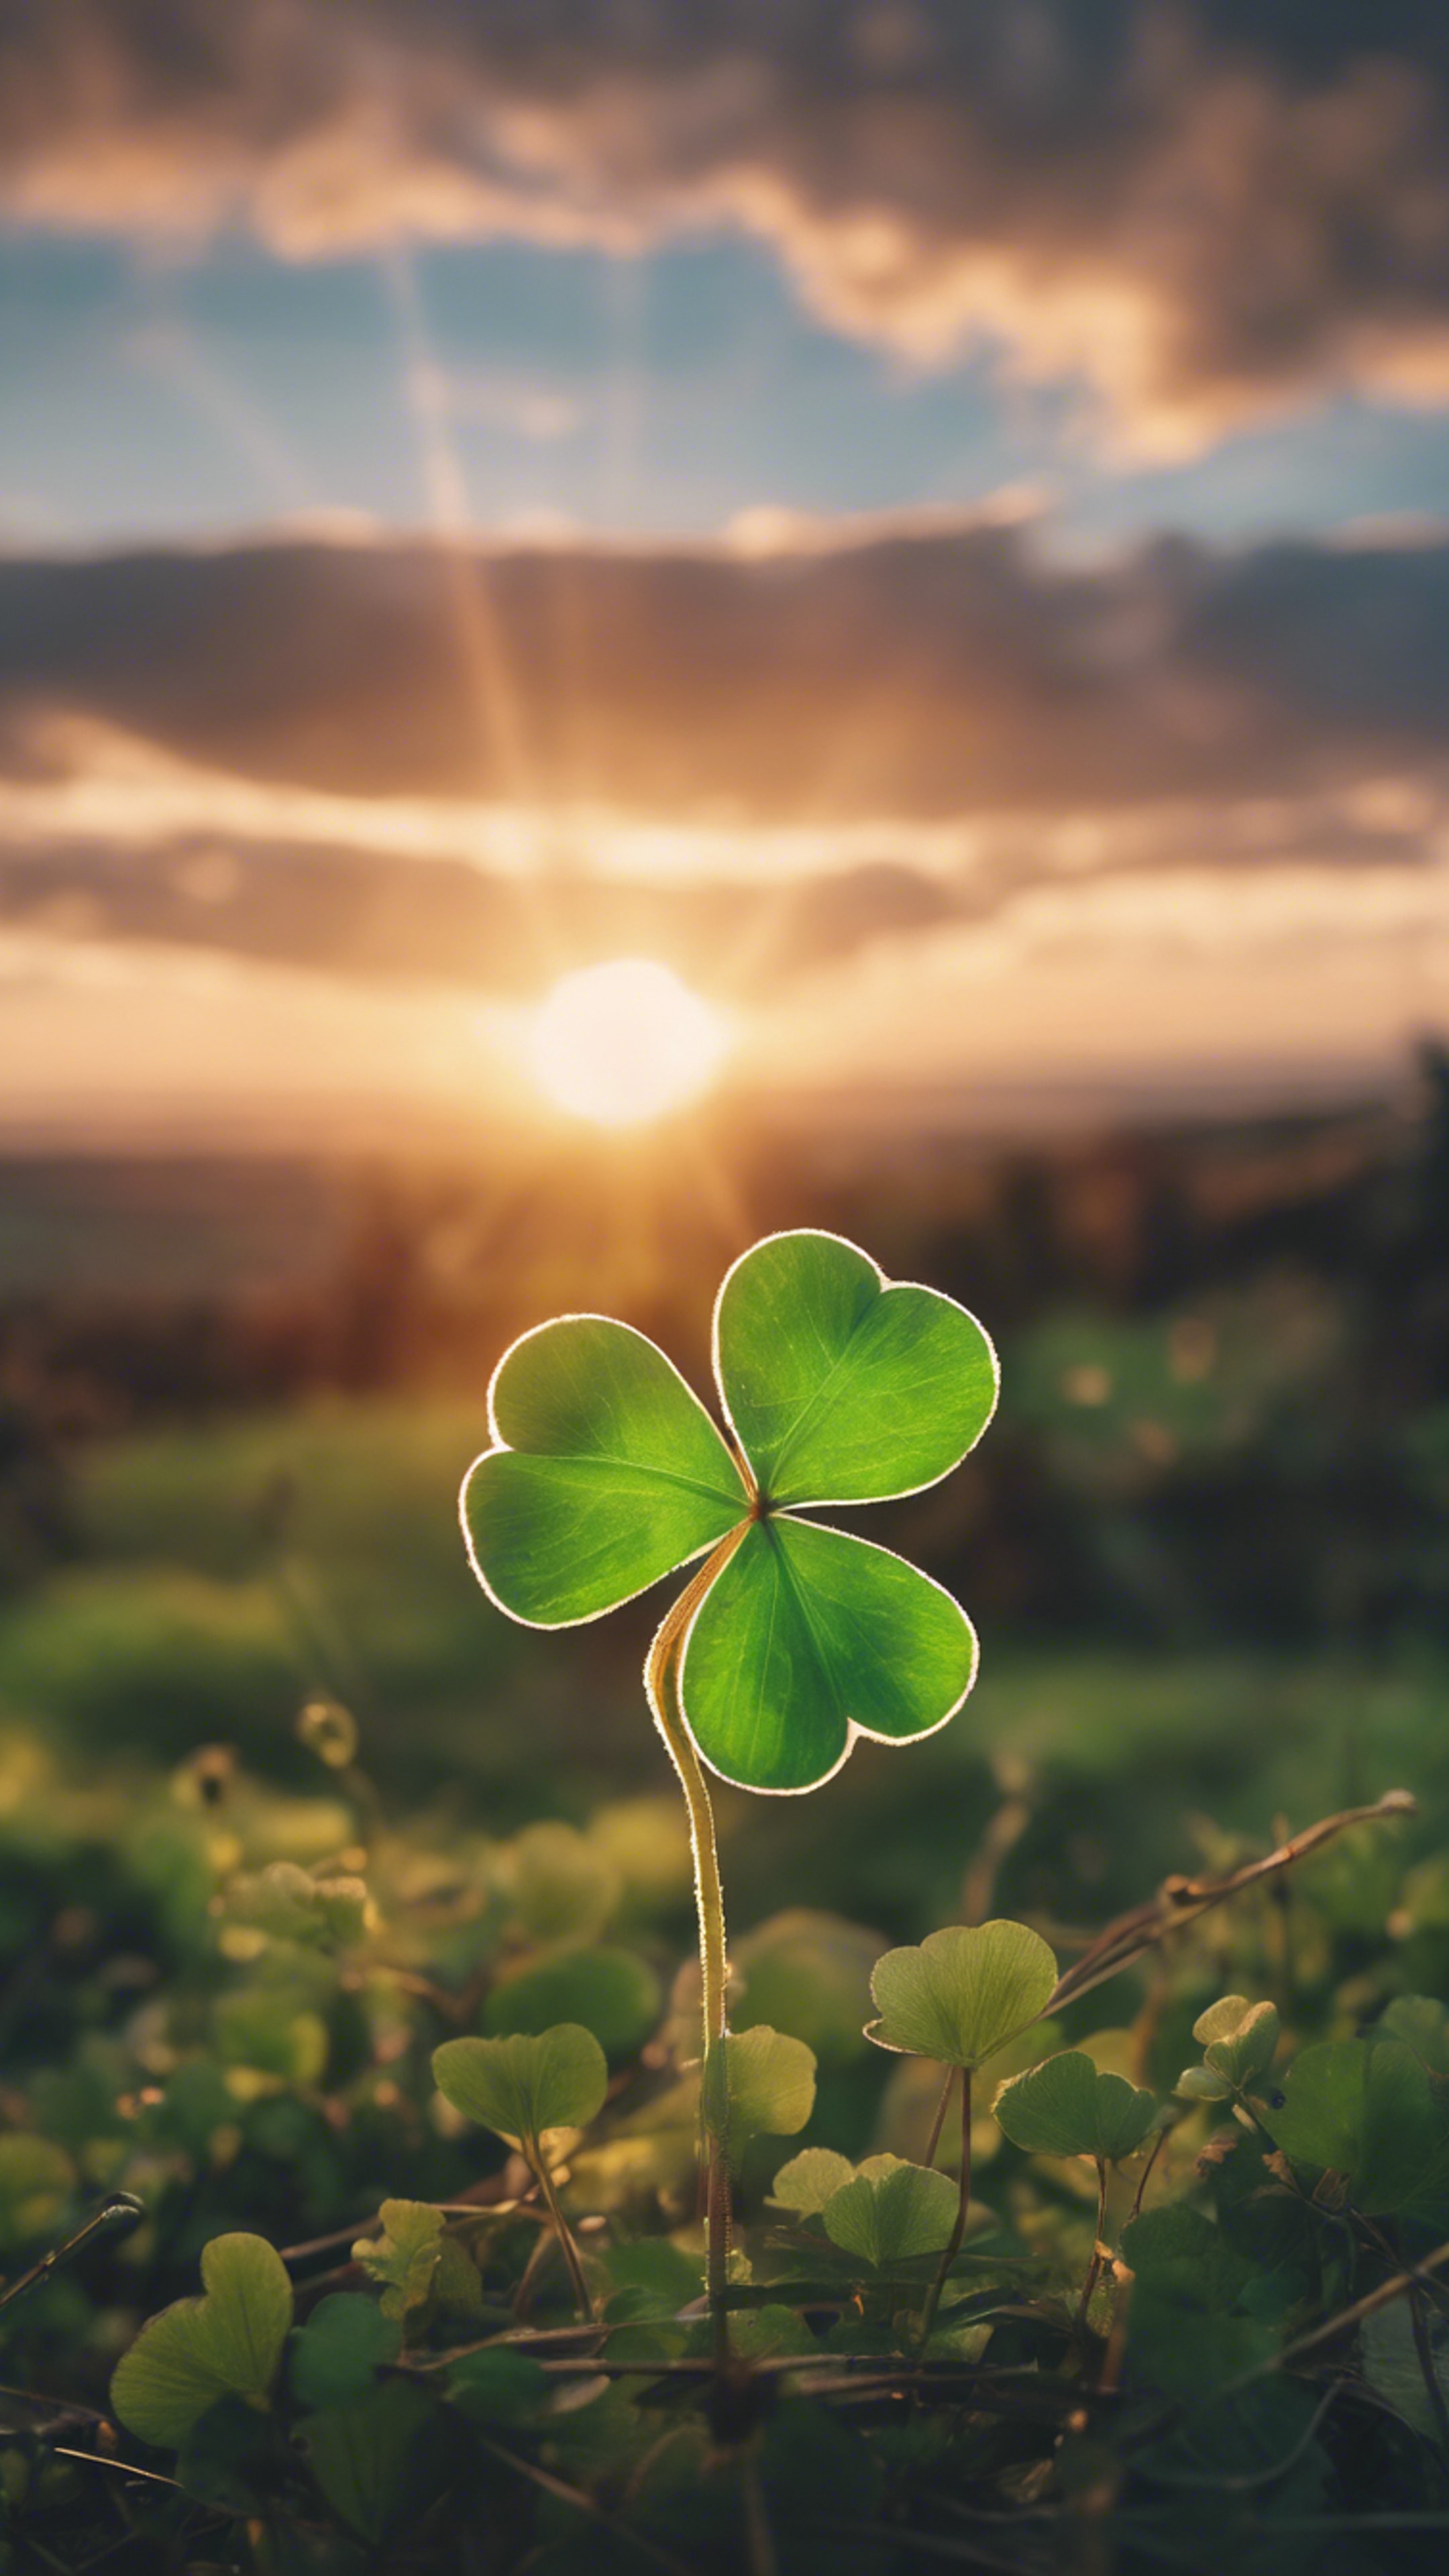 An enchanting sunset over the Irish countryside with a four-leaf clover in the foreground on St. Patrick's Day. 牆紙[4ad1db603cc8494da5b1]